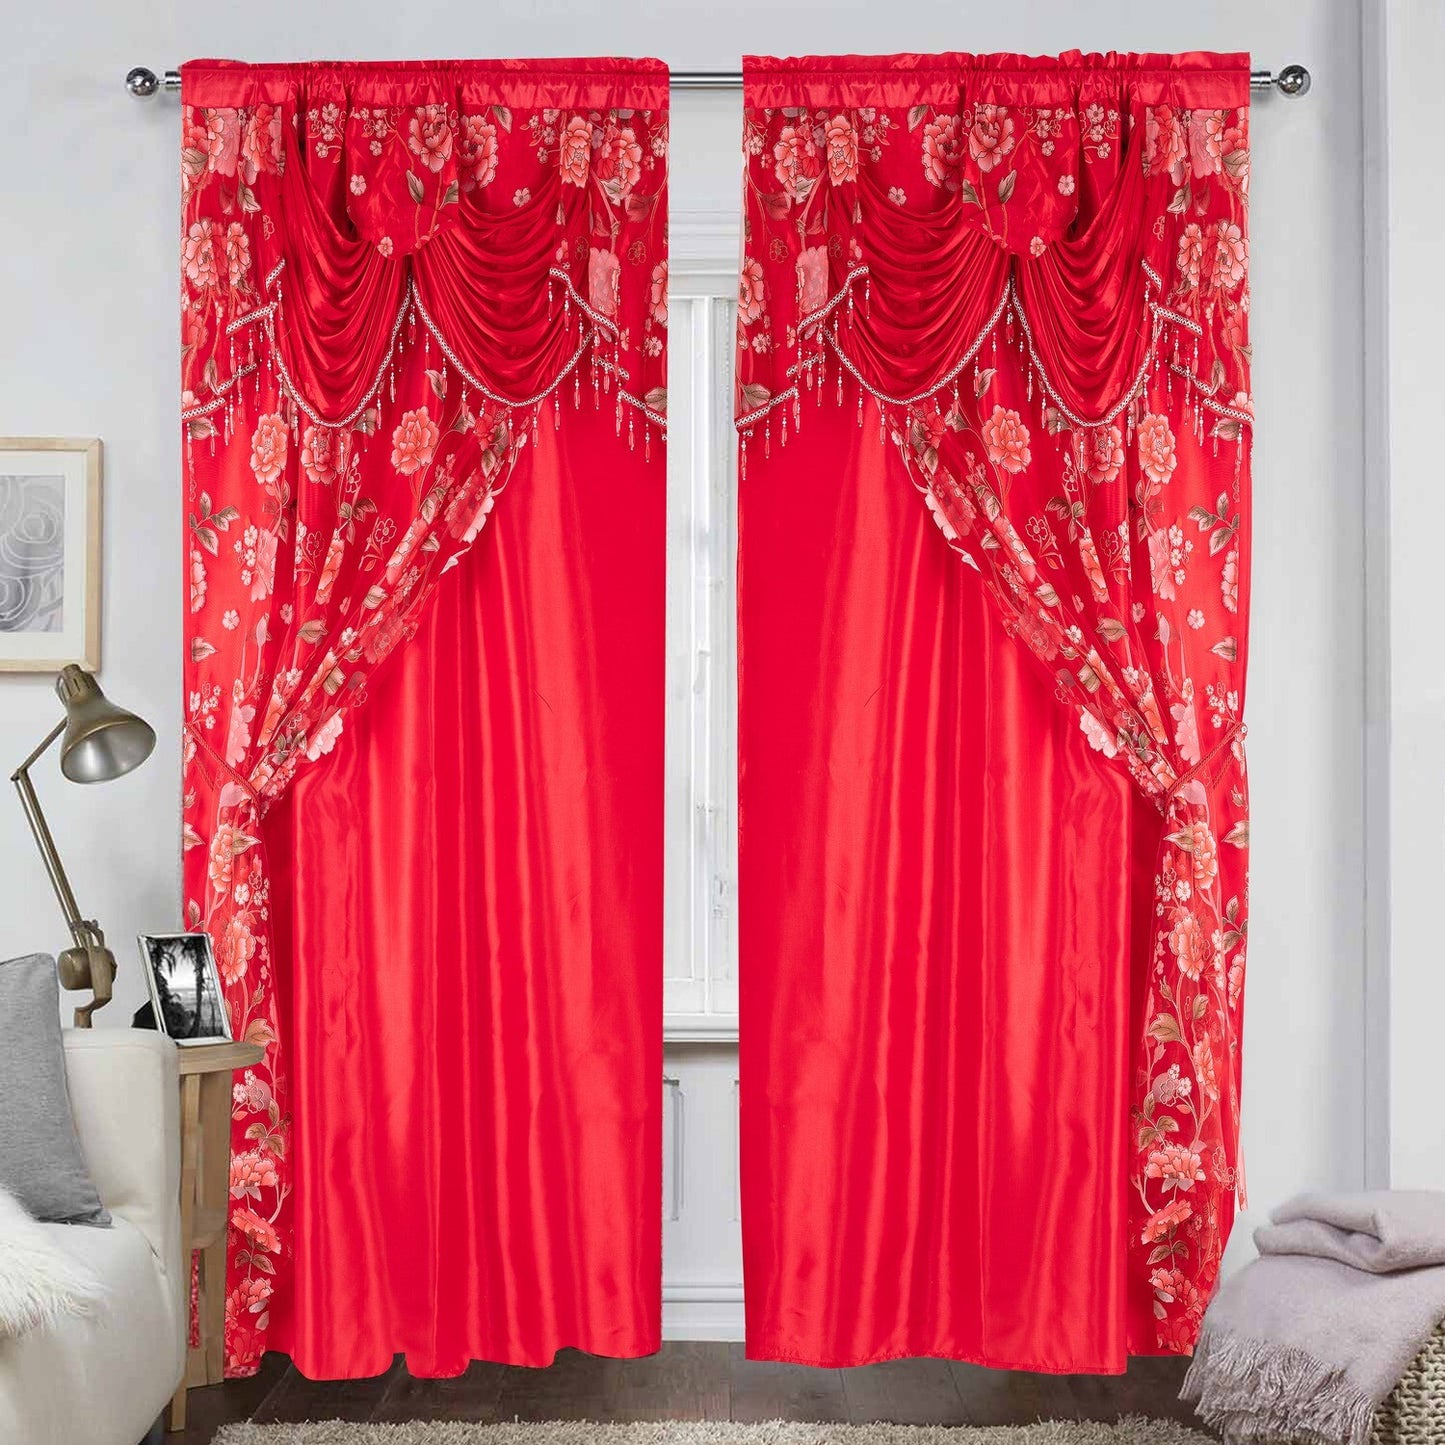 Glory Rugs Flower Curtain Window Panel Set 2 Luxury Curtains with Attached Valance and Sheer Backing Living Room Bedroom Dining 55x84 Each Balsam Red